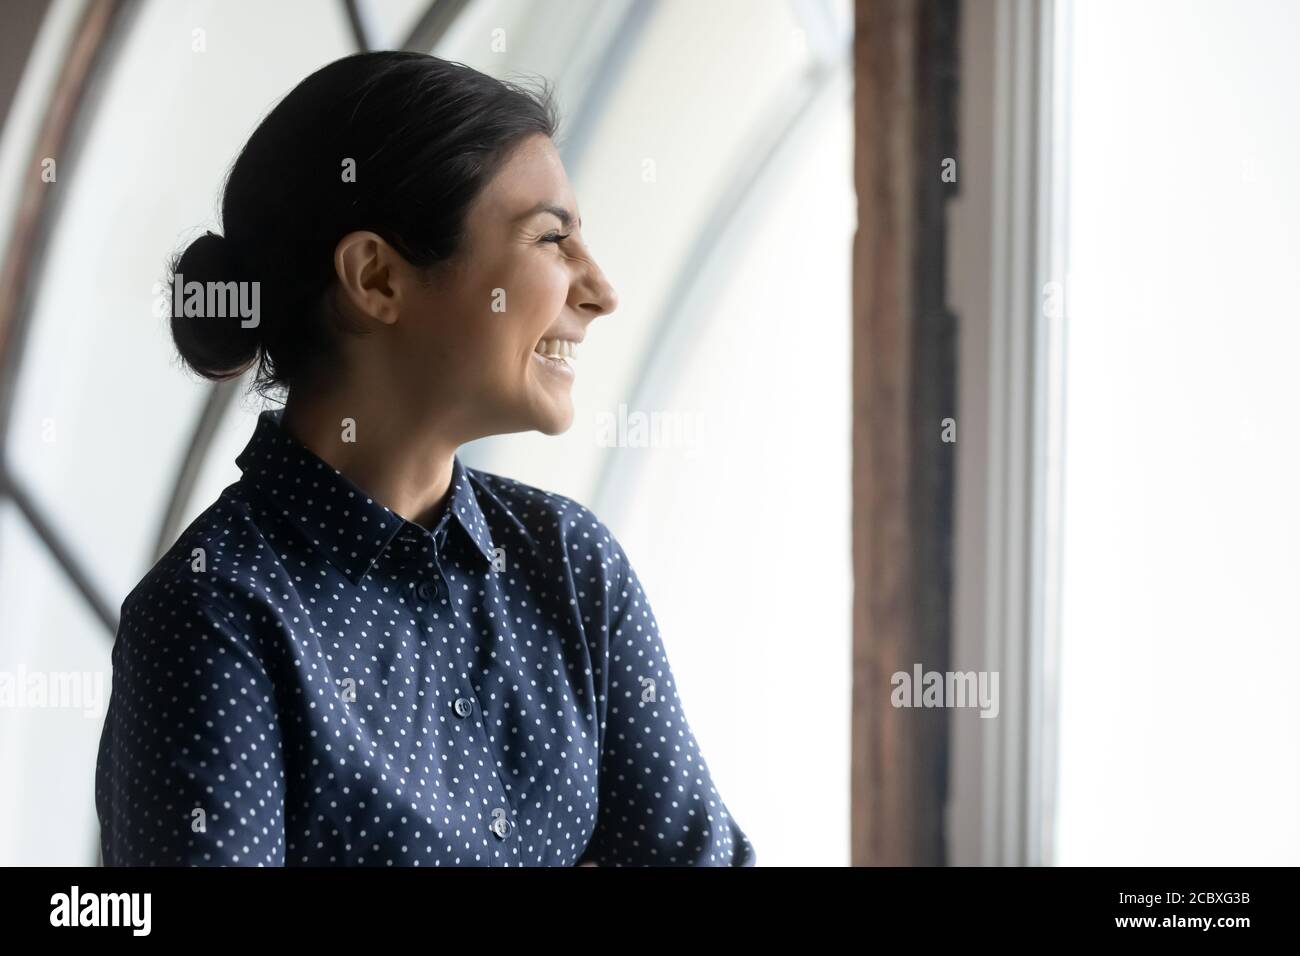 Overjoyed young emotional indian woman looking out of window. Stock Photo